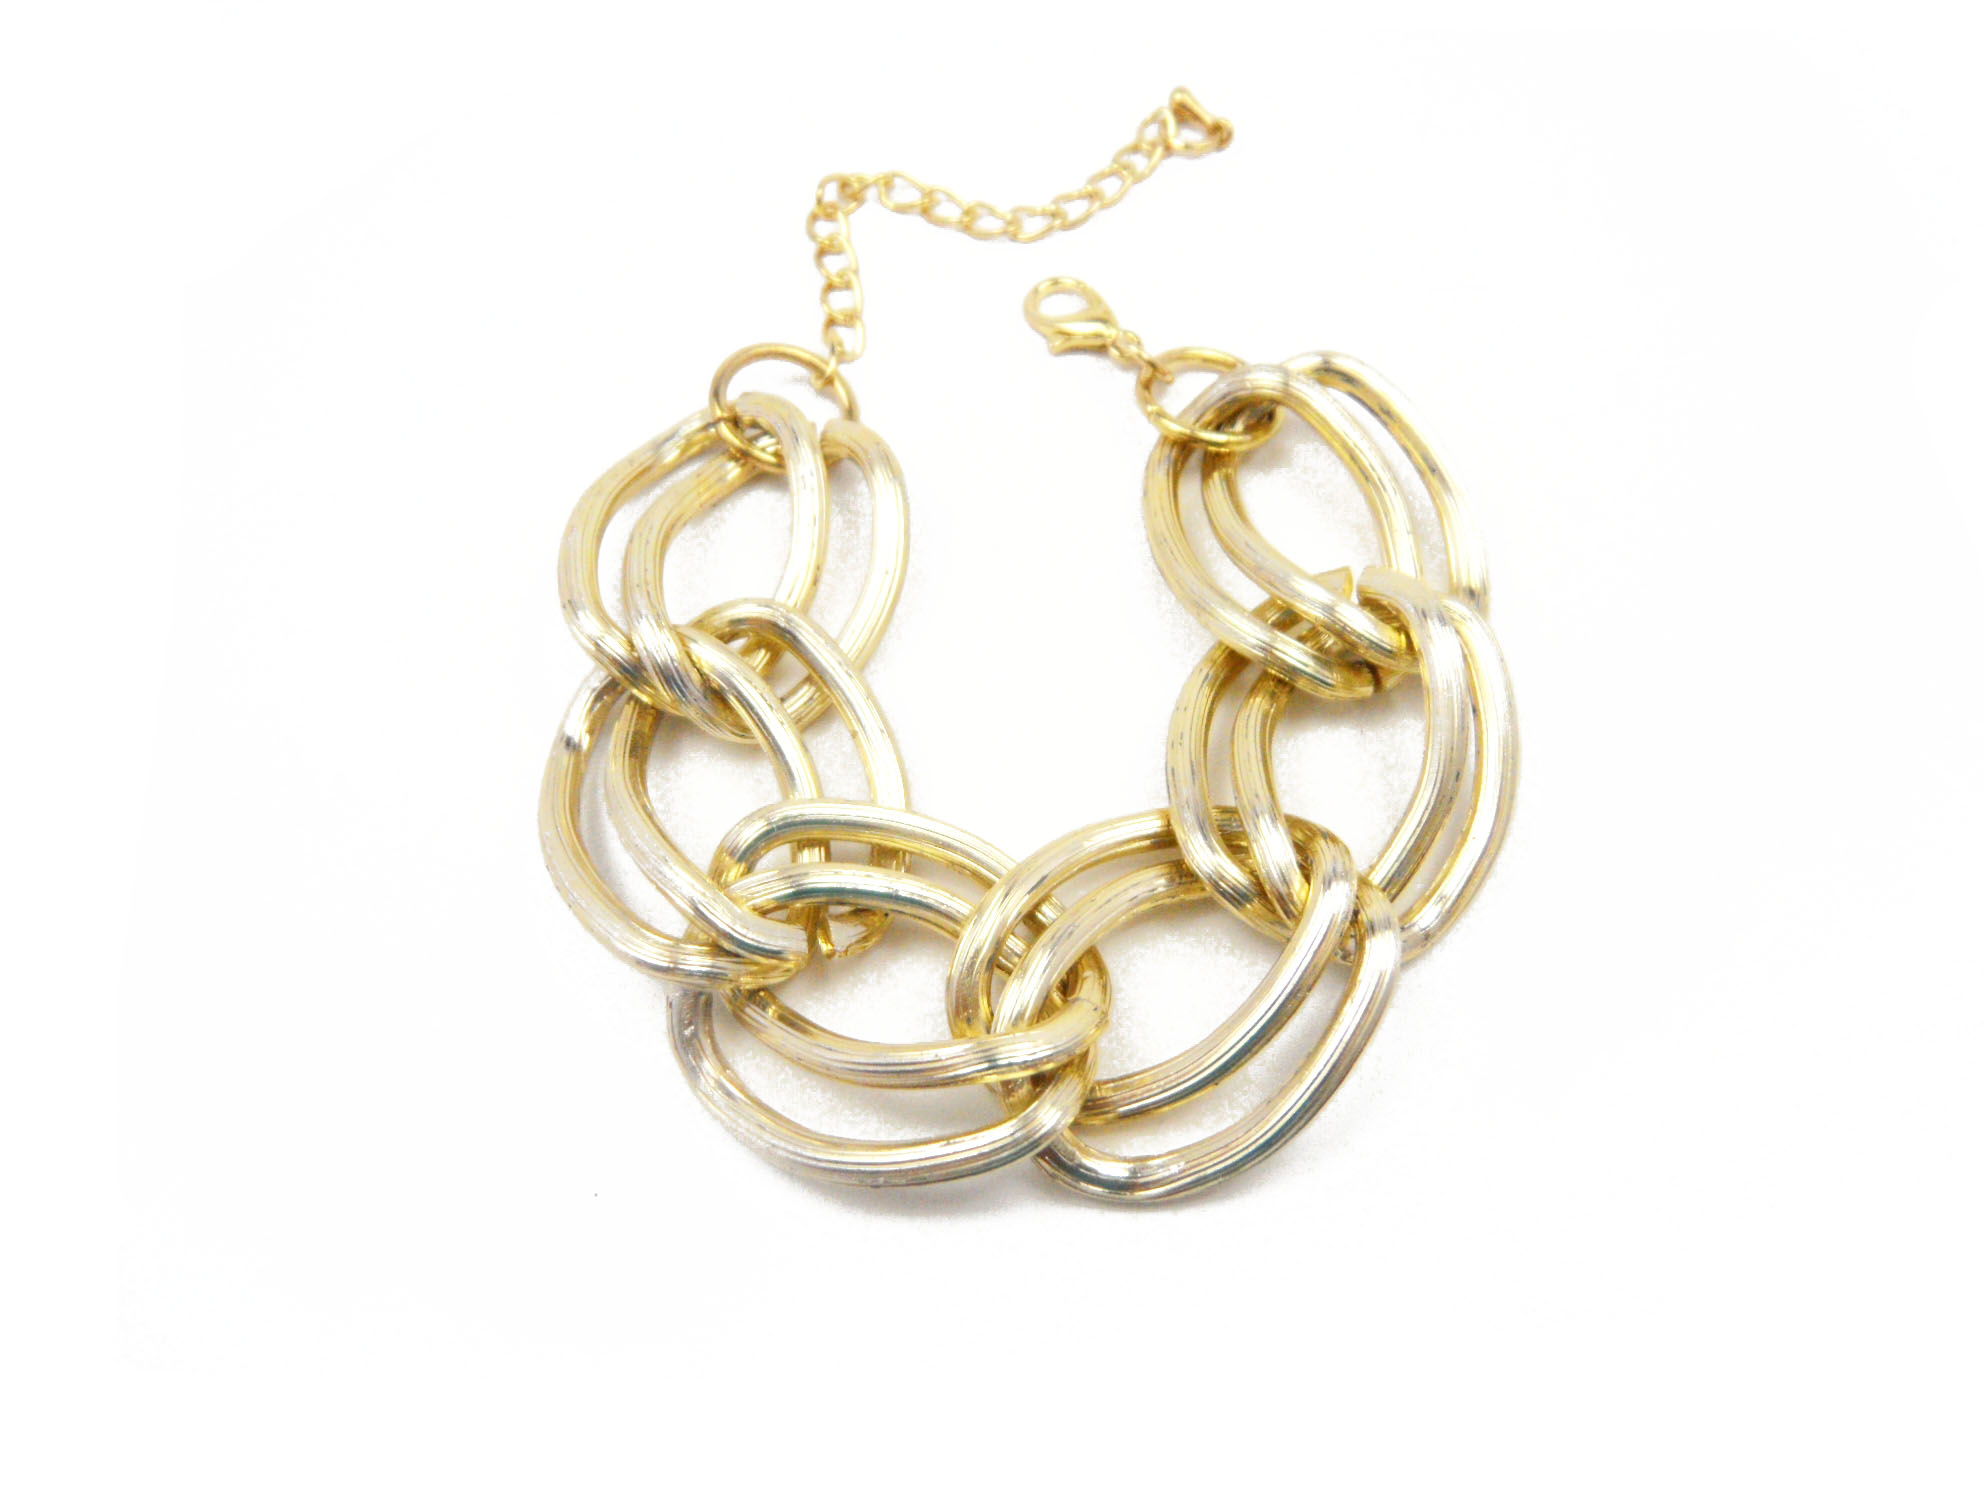 Fashion jewelry made of zinc alloy,available in various designs